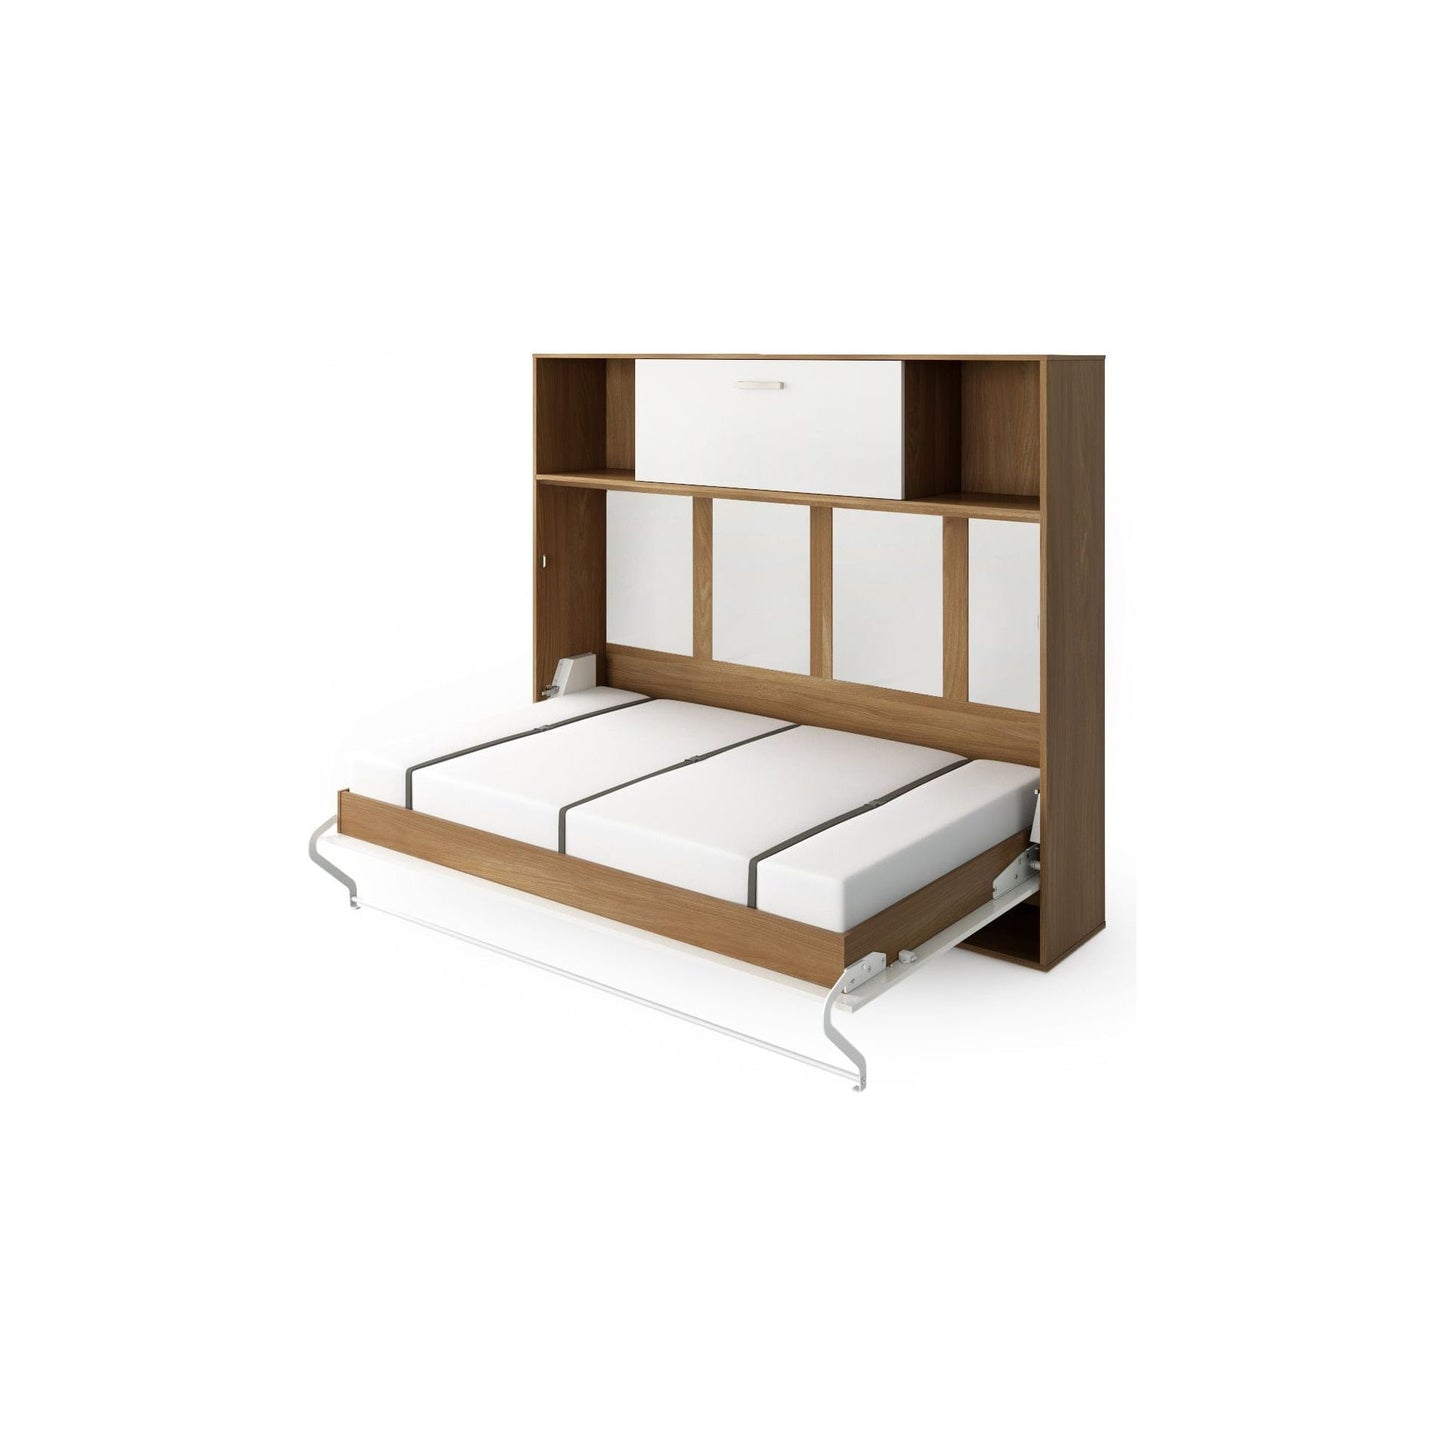 Maxima House Maxima House Horizontal Murphy Bed Invento, European Full Size with a cabinet on top, mattress included